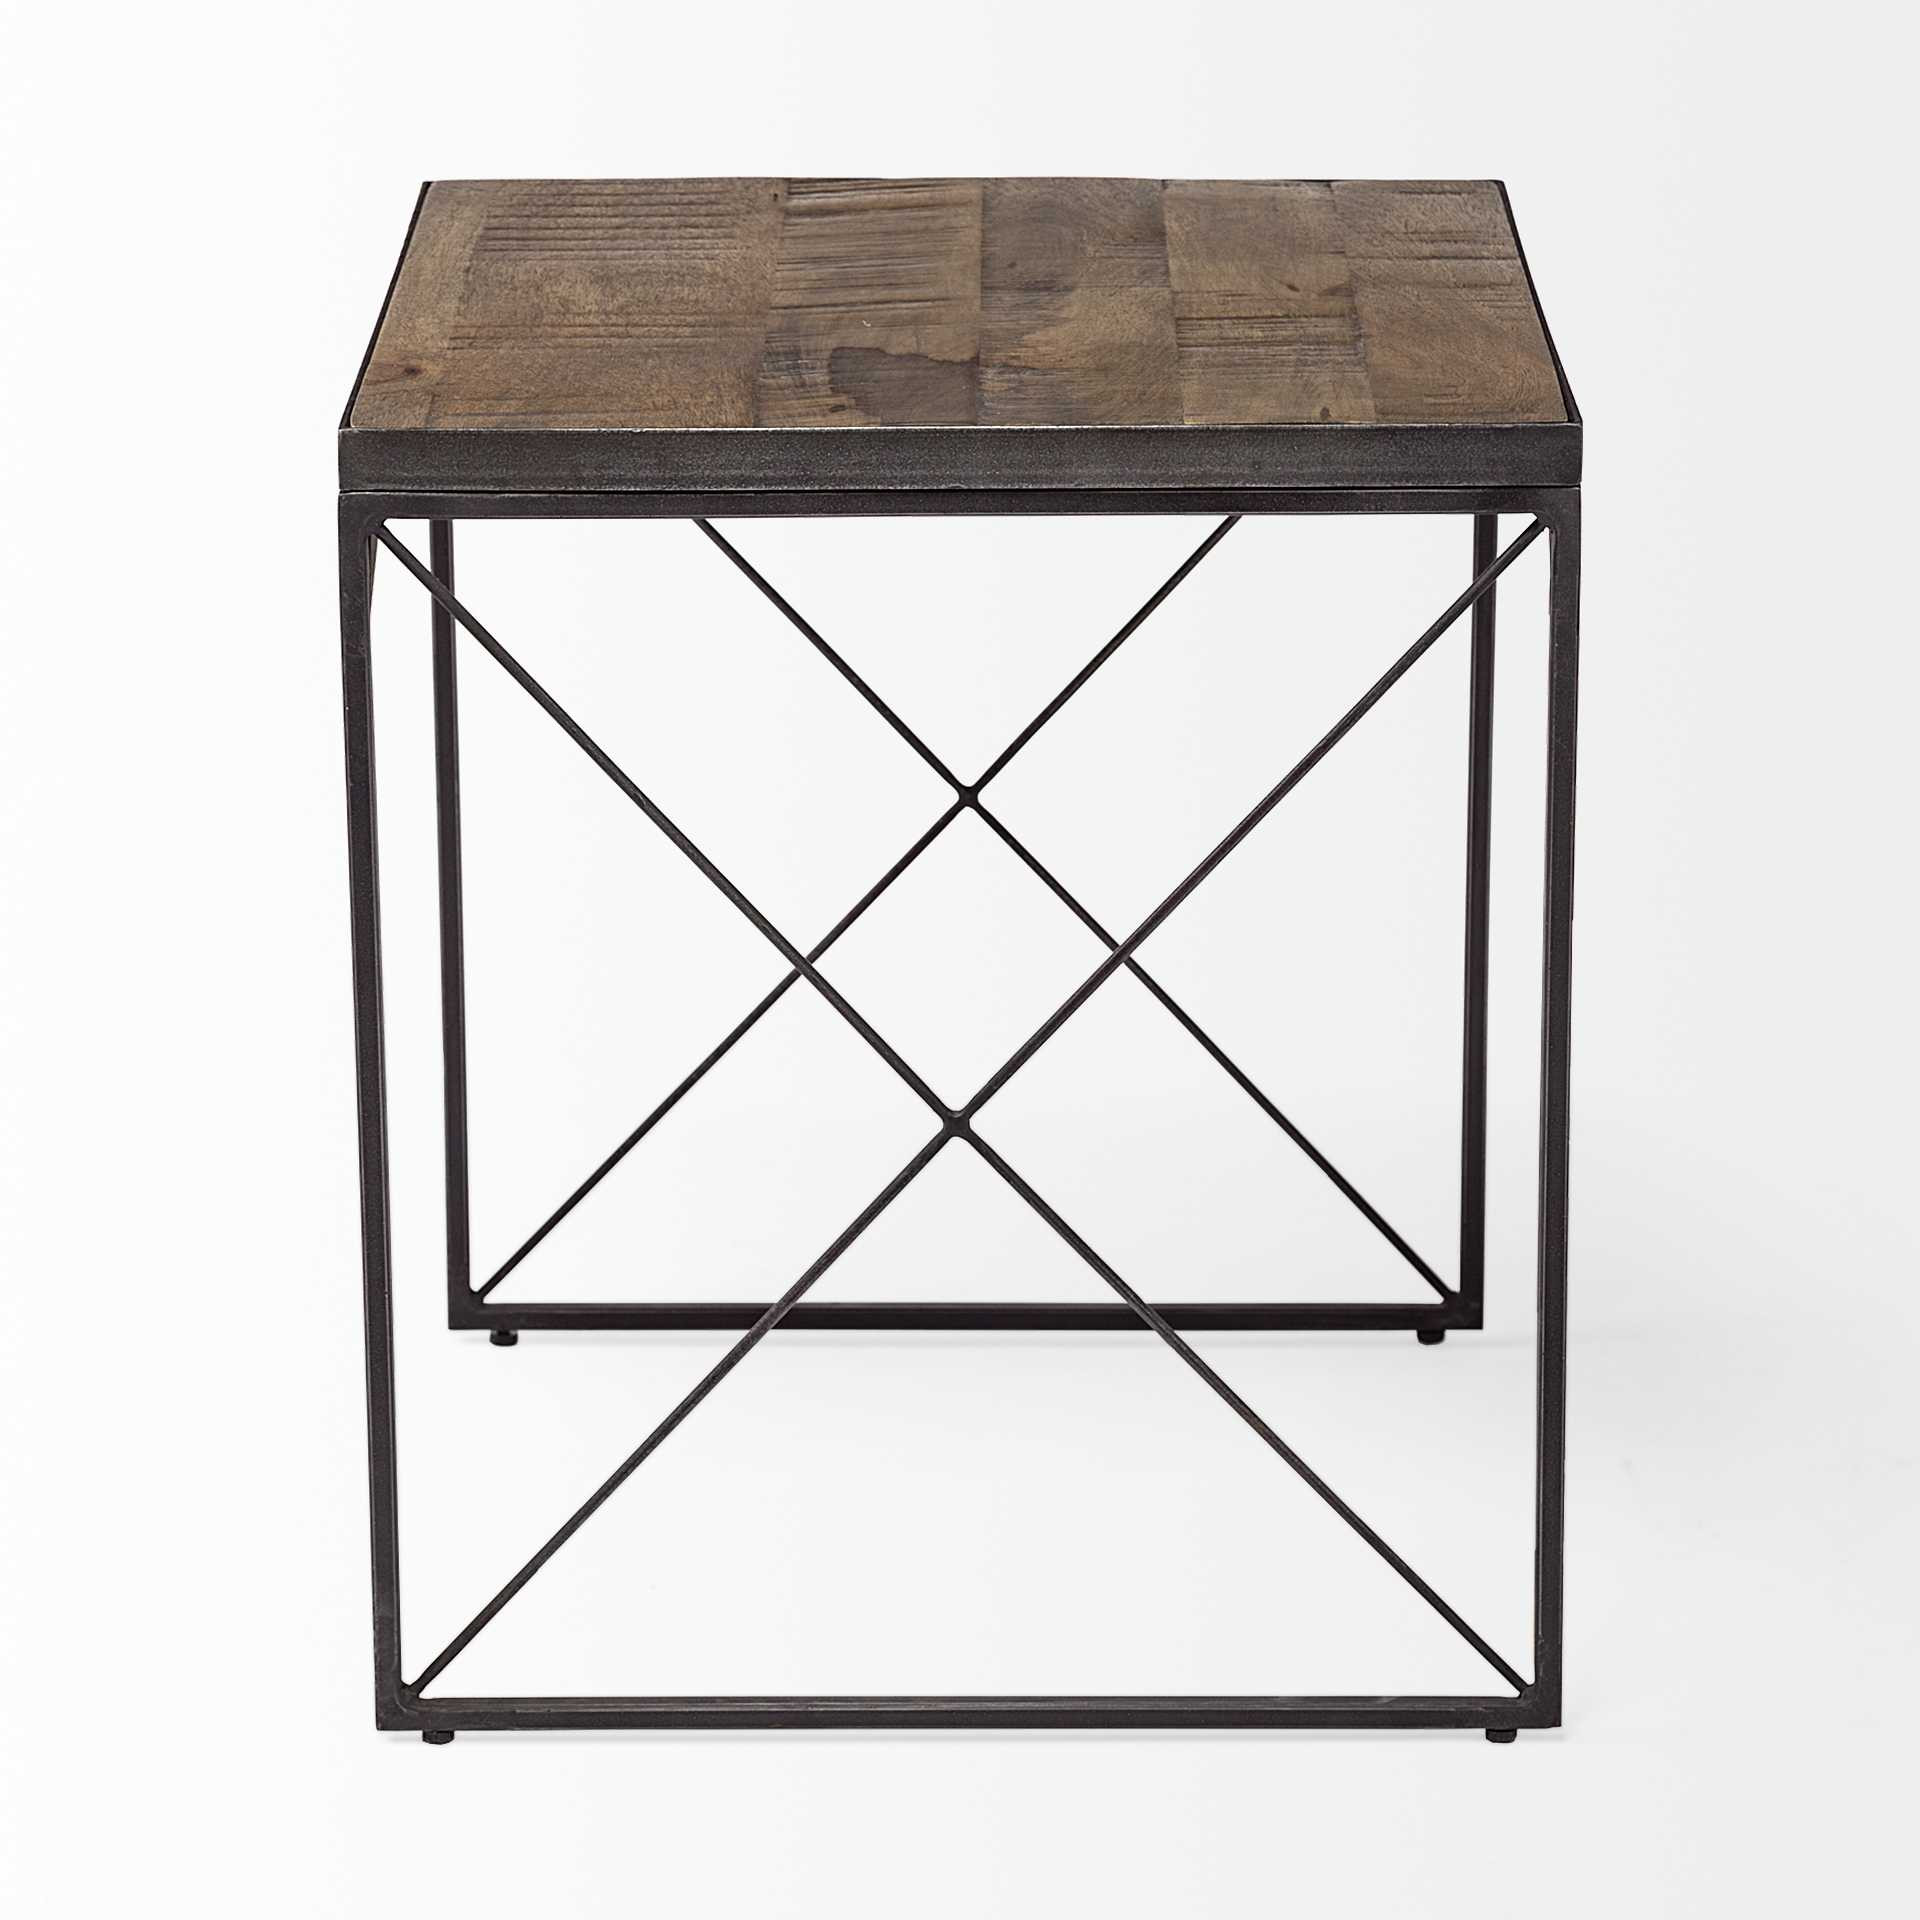 Medium Brown Wood Side Table with Square Top and Iron Cross Braced